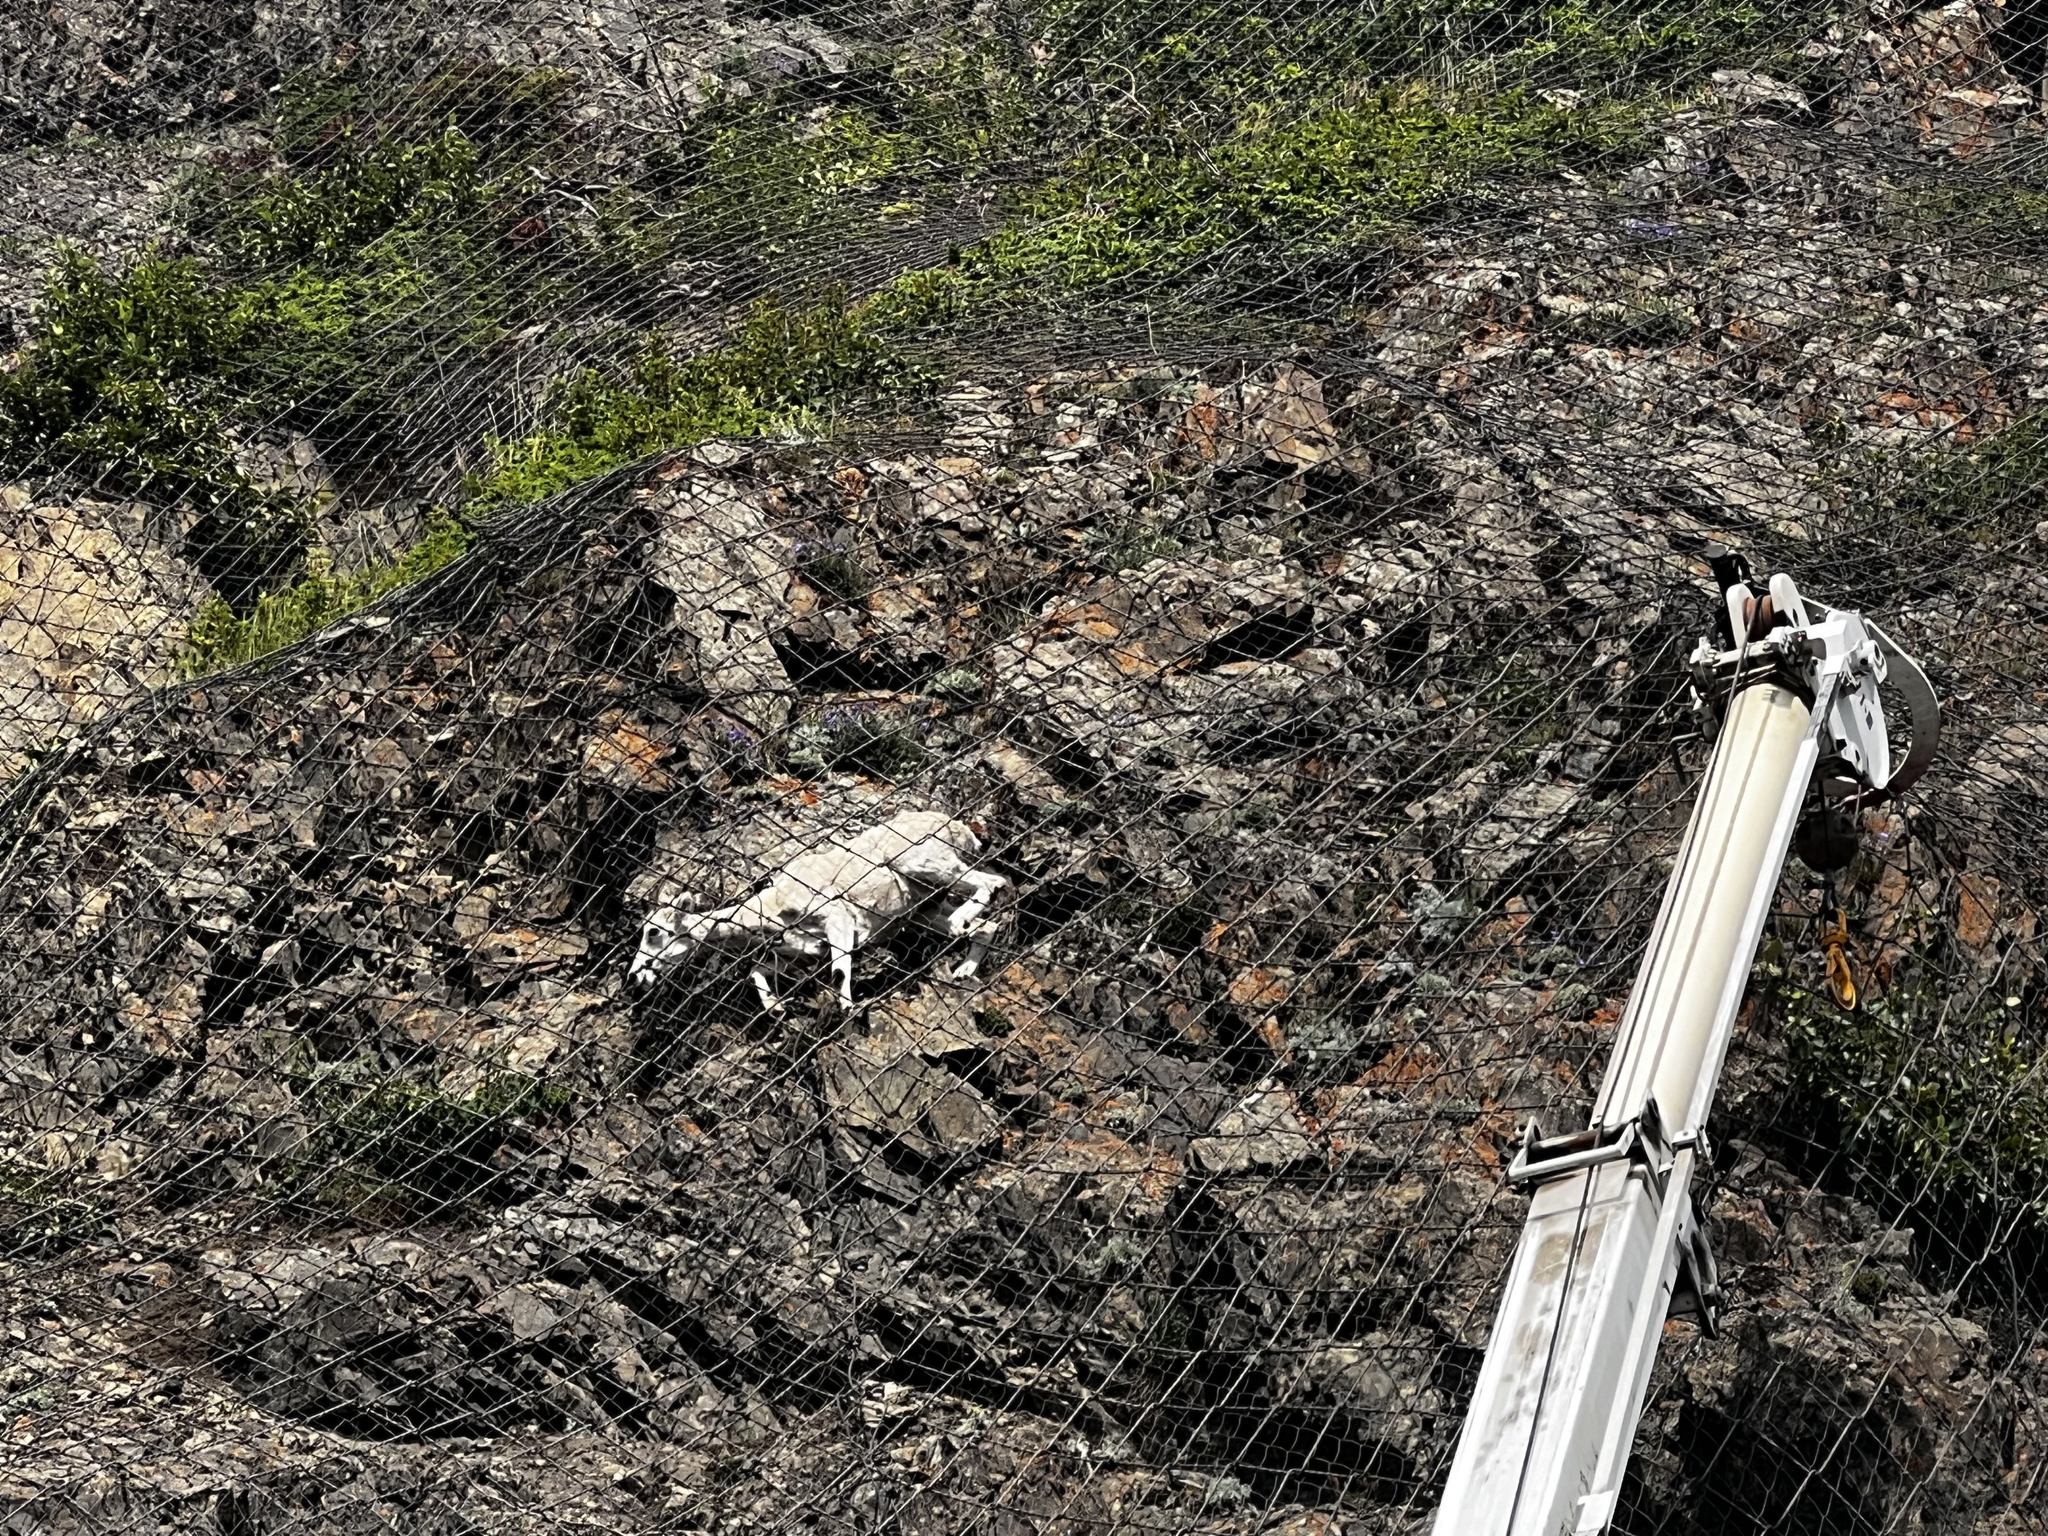 a sheep on a steep rock face with a boom arm